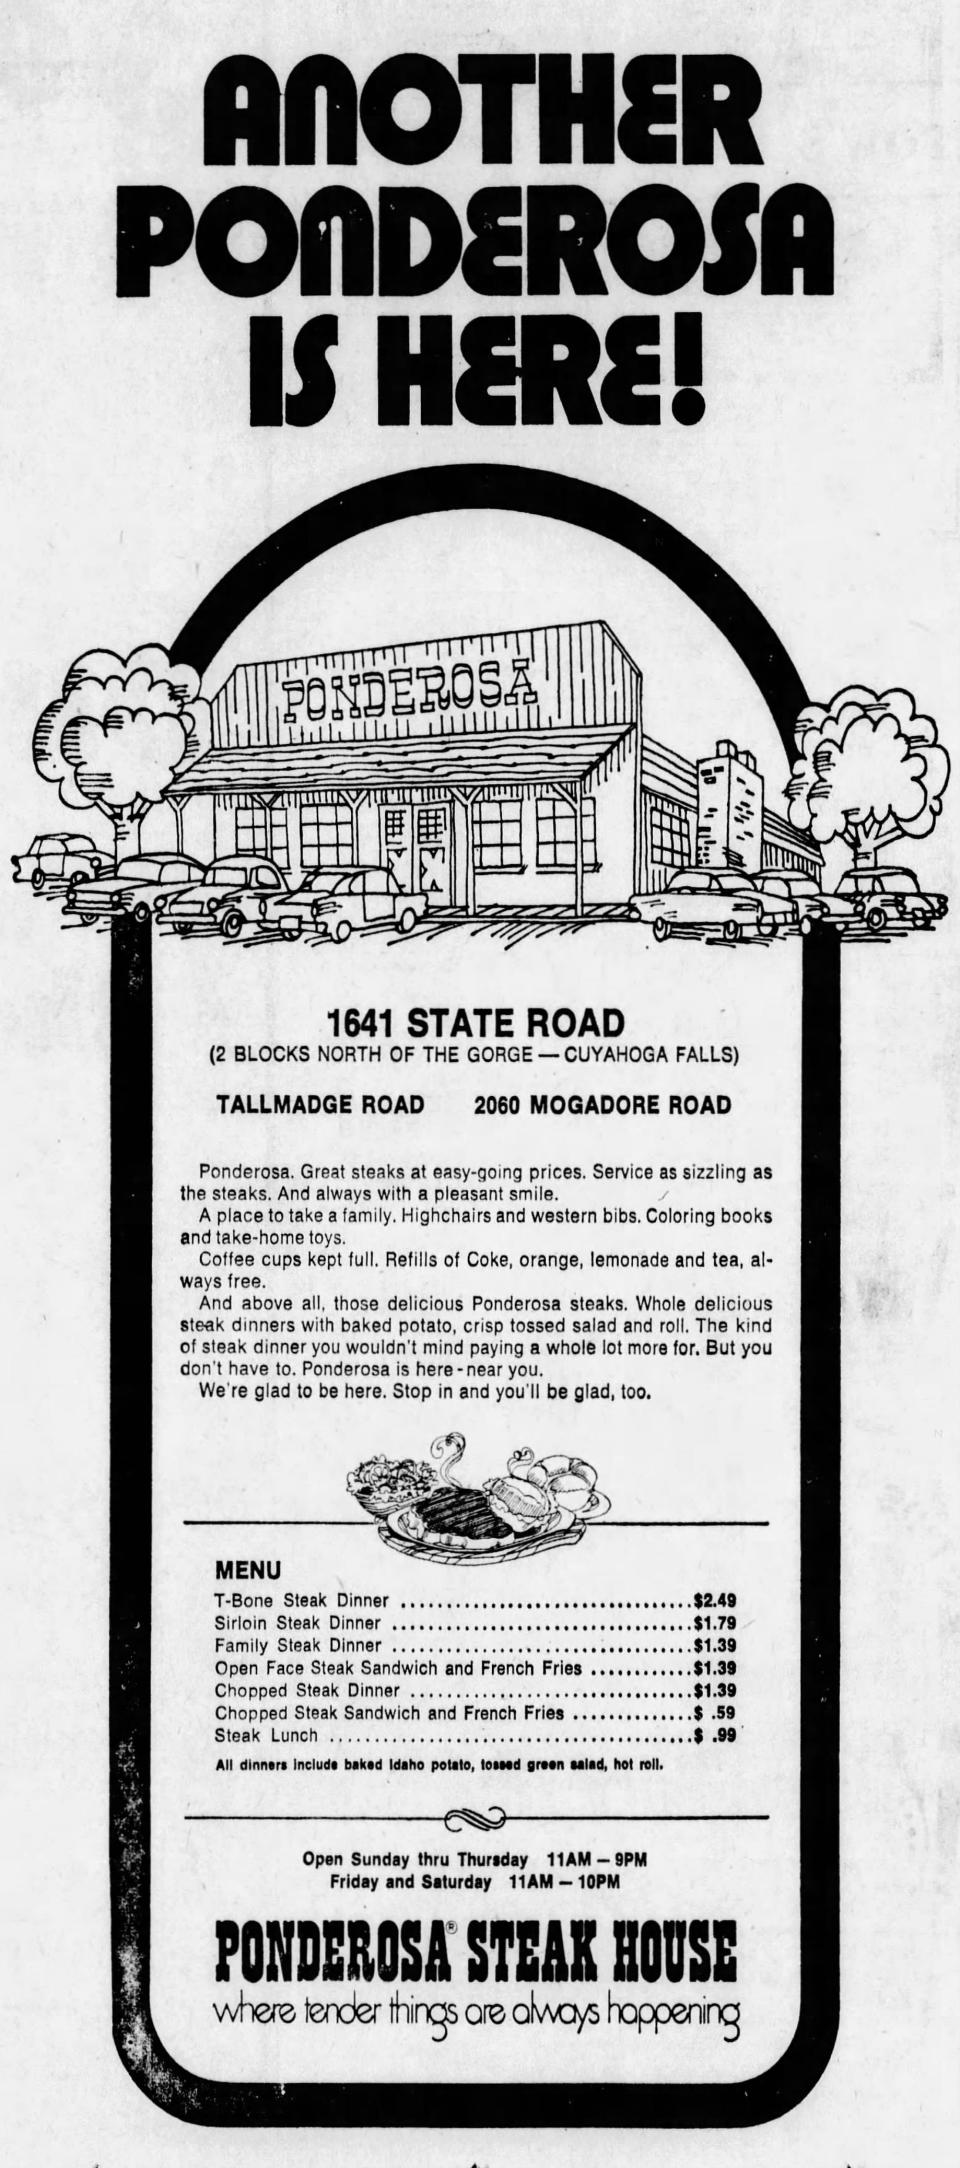 A Beacon Journal advertisement promotes the 1972 opening of a Ponderosa restaurant on State Road in Cuyahoga Falls.